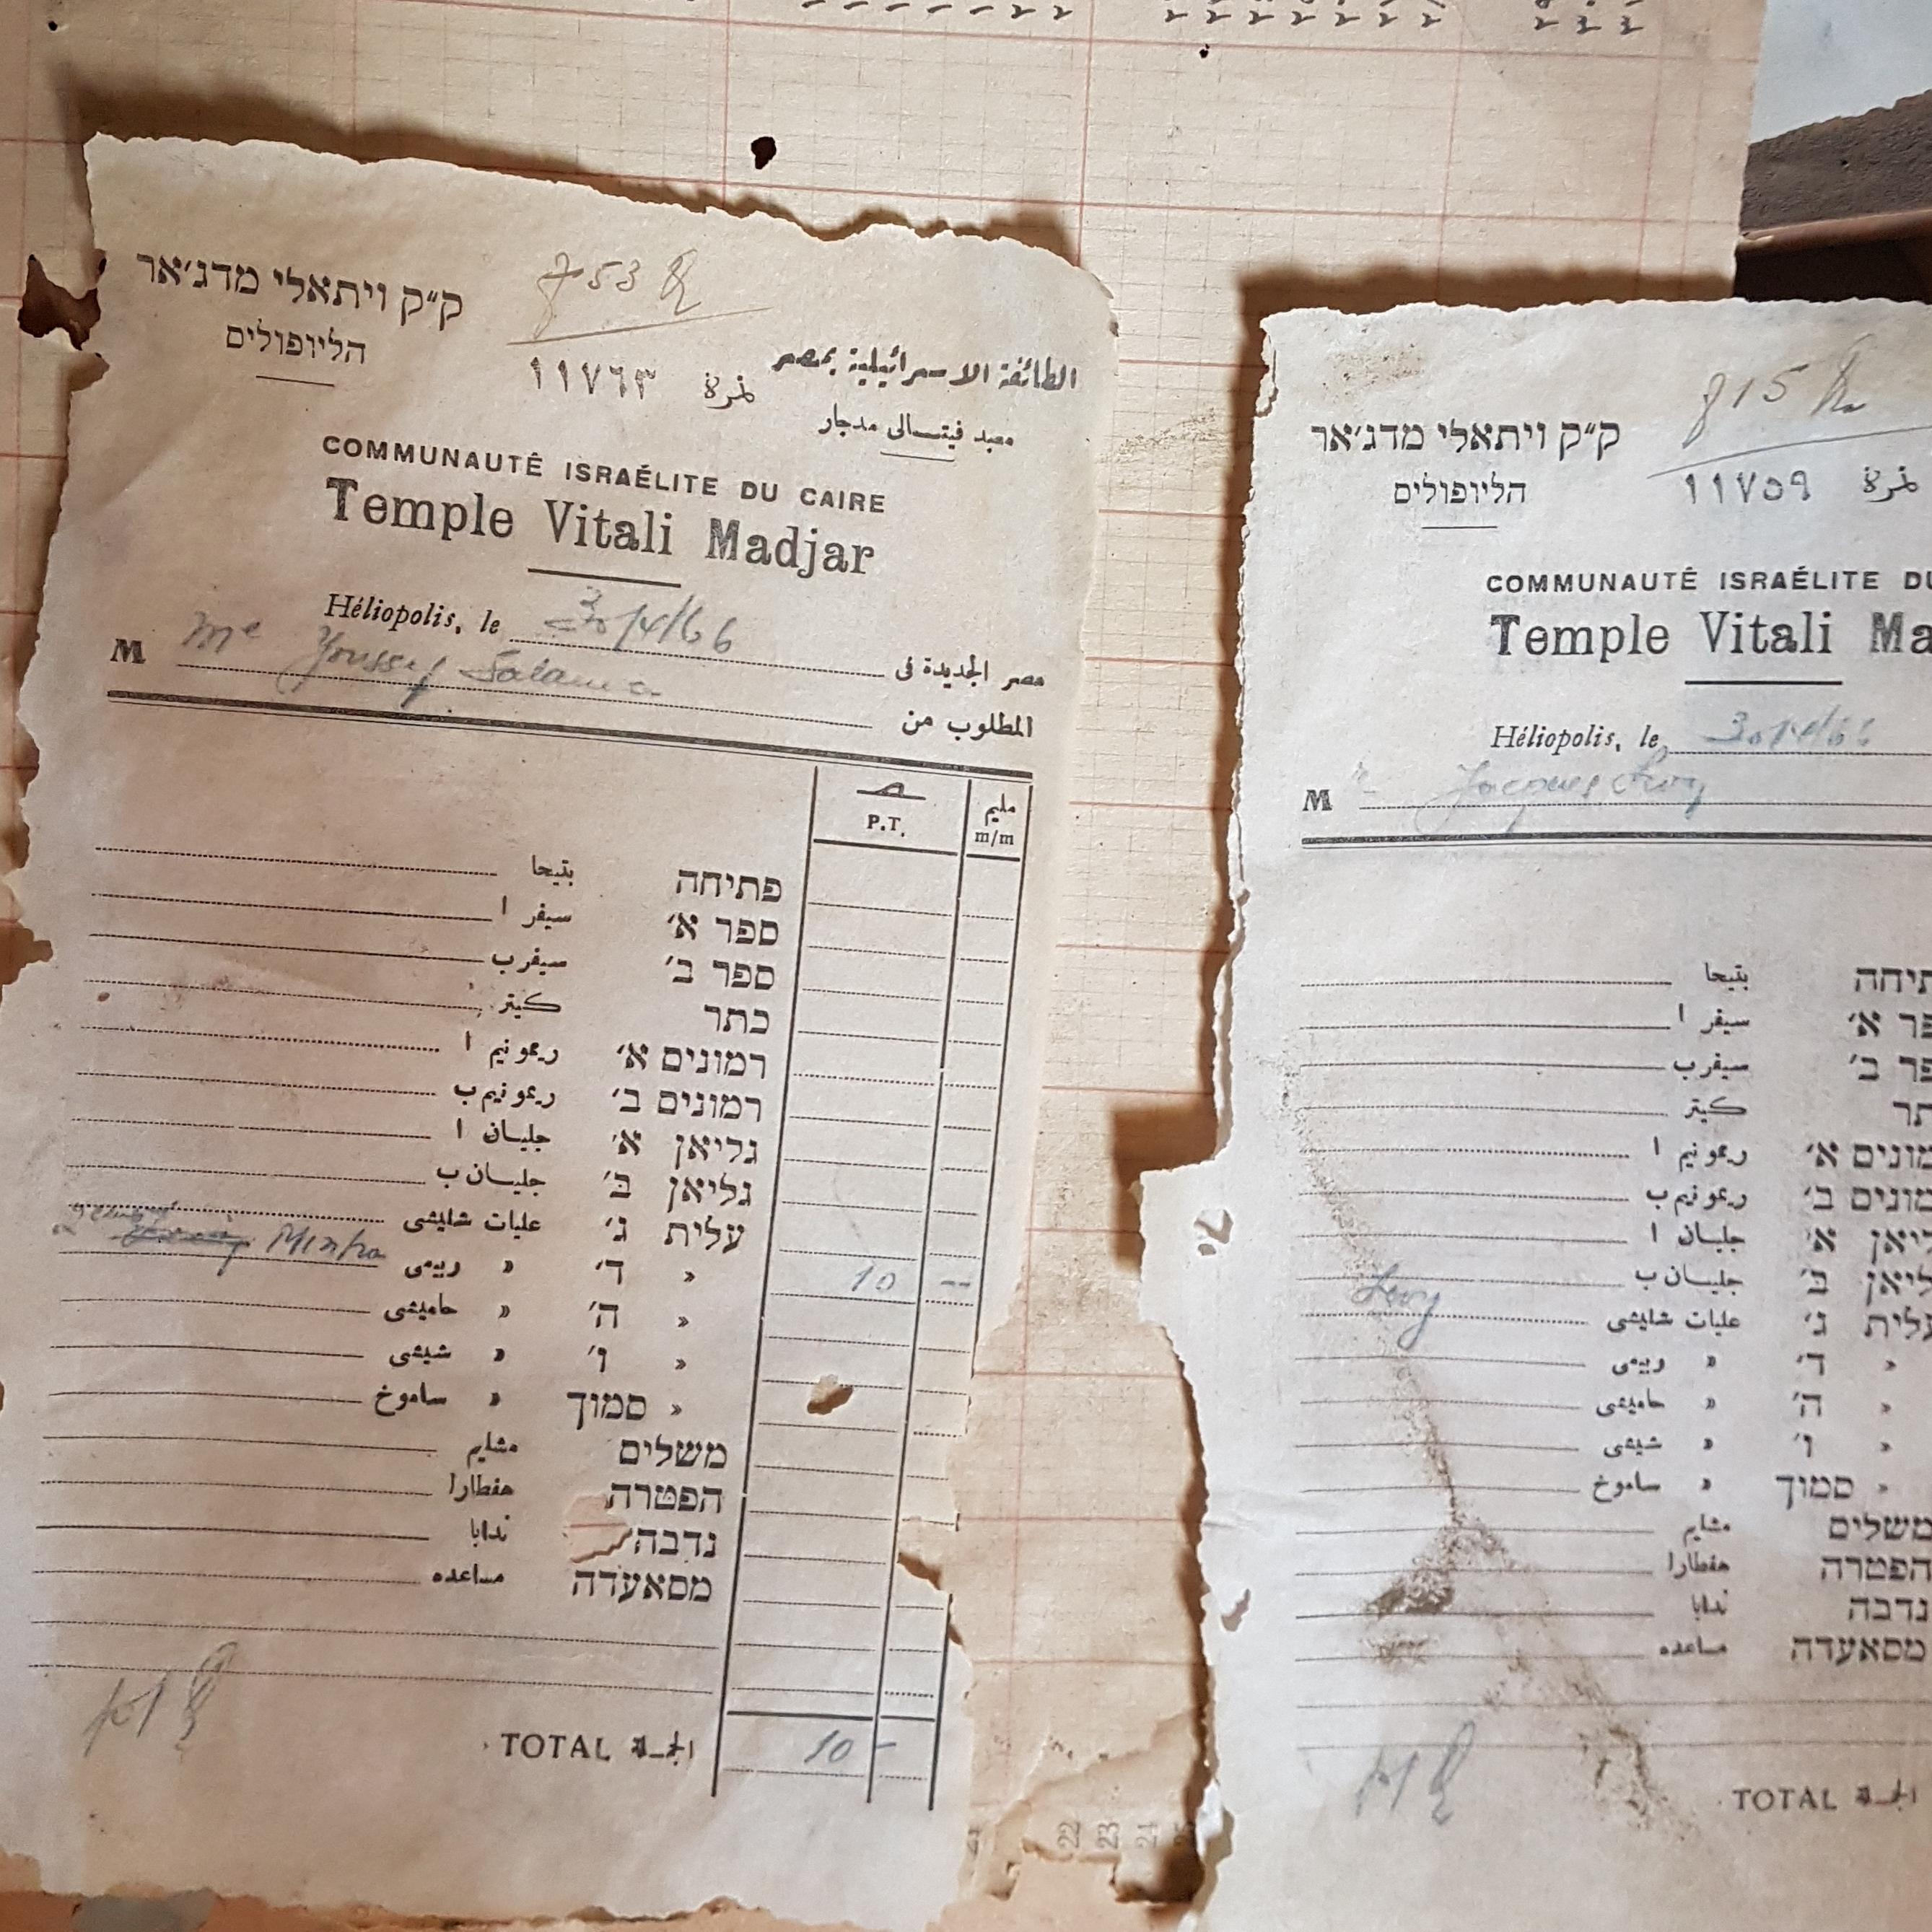 The Living Archive of the Jewish Community in Arab Countries